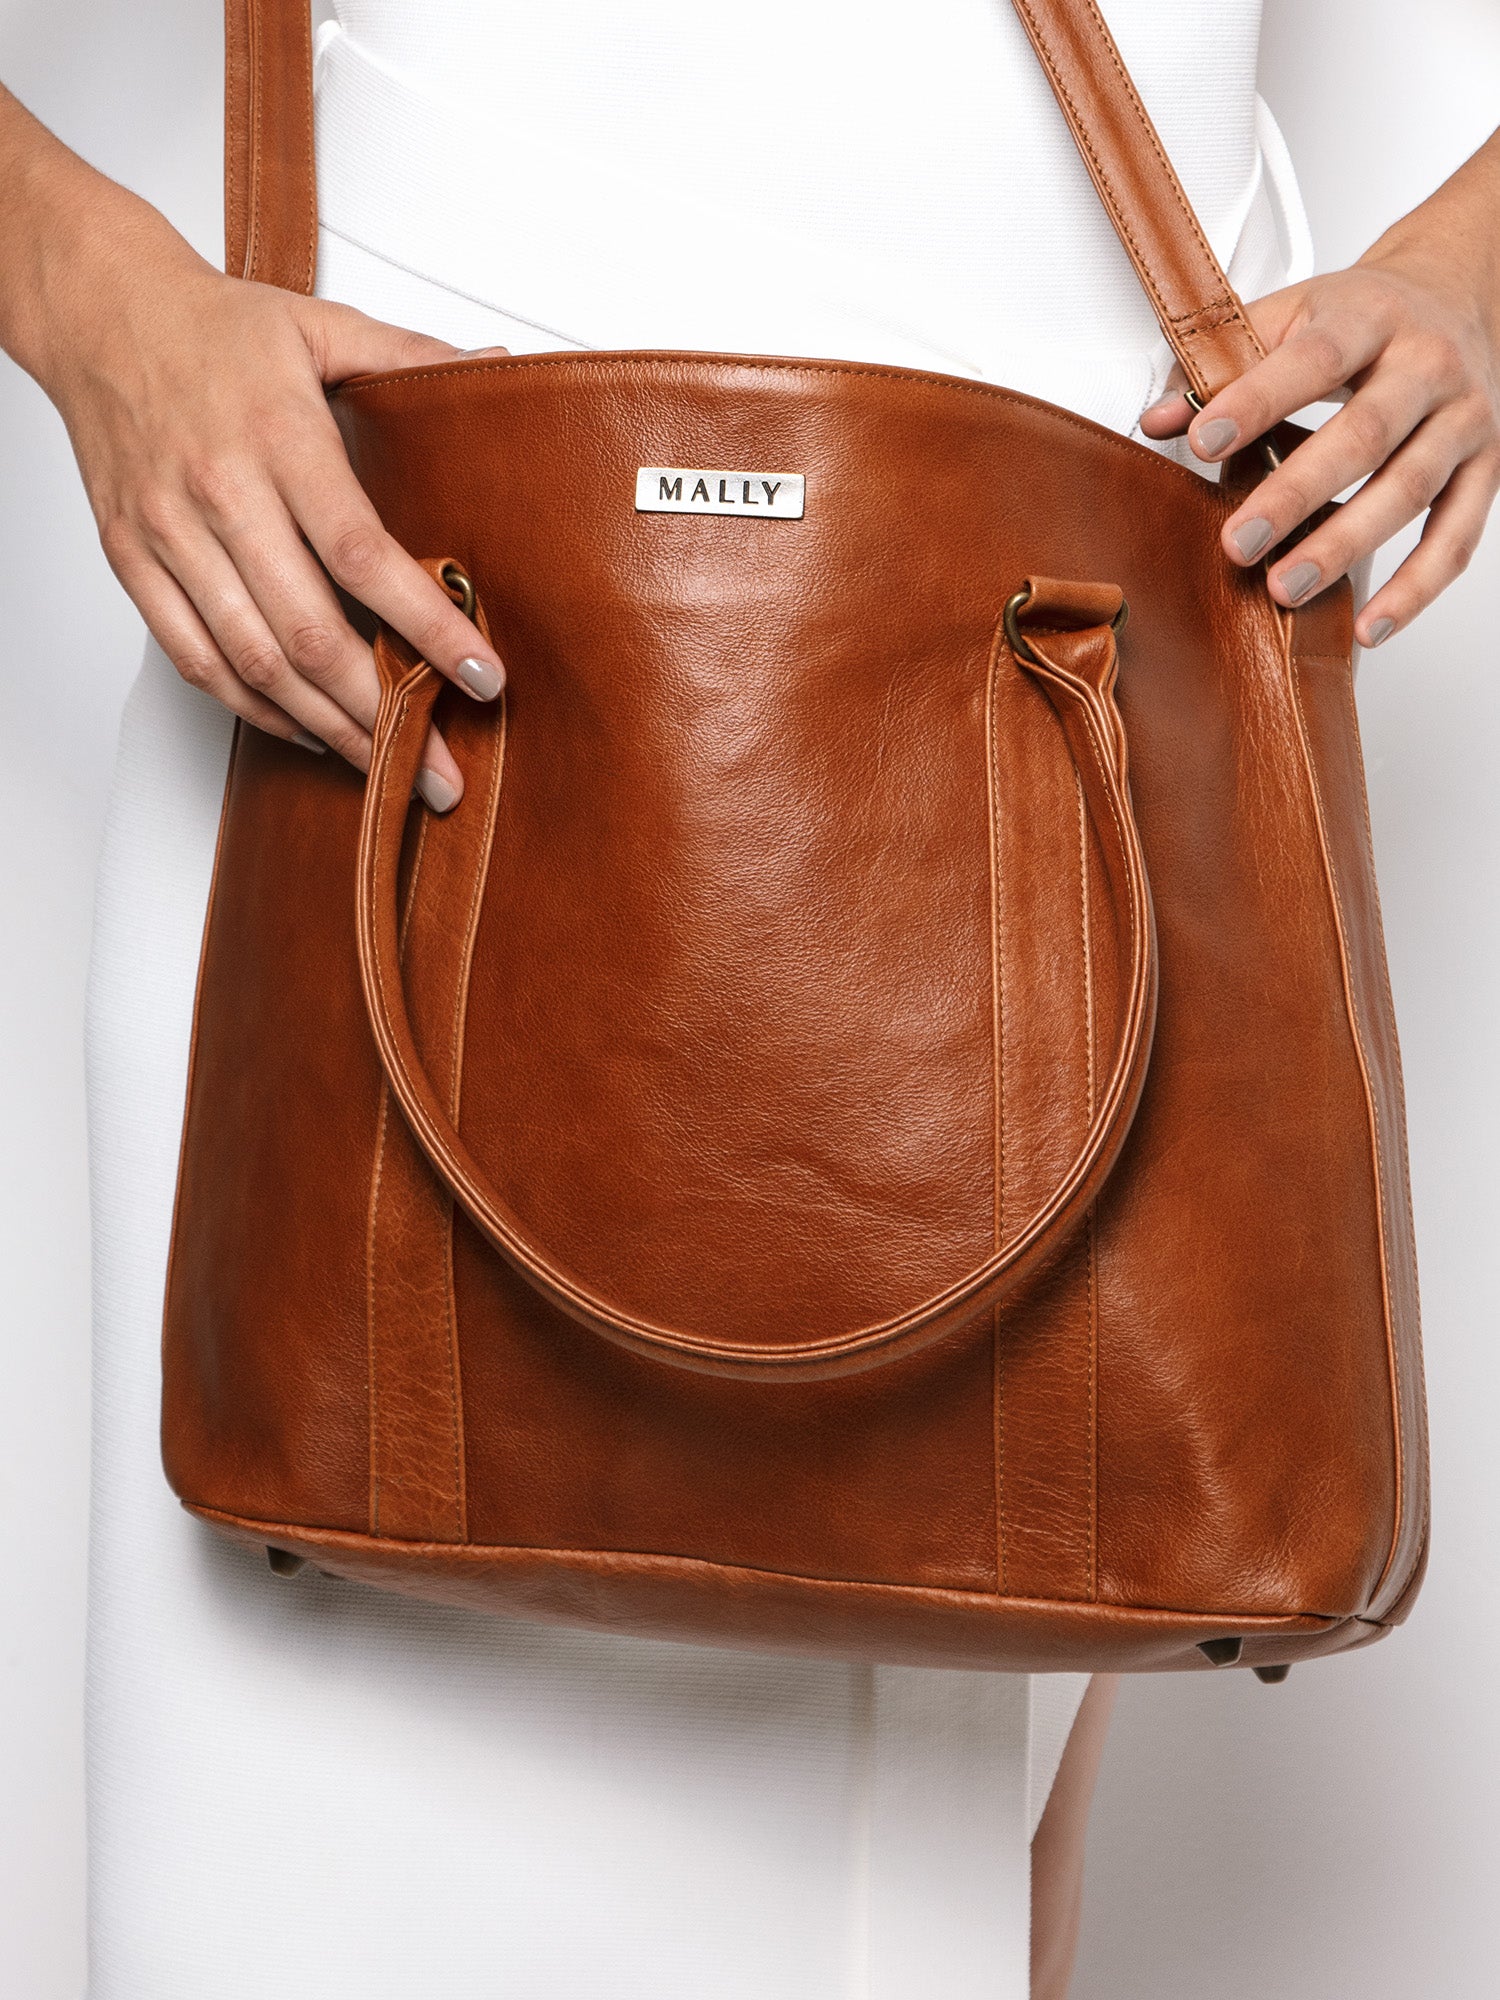 Mally Bags - Shop luxury, functional and lasting leather bags – Mally SA